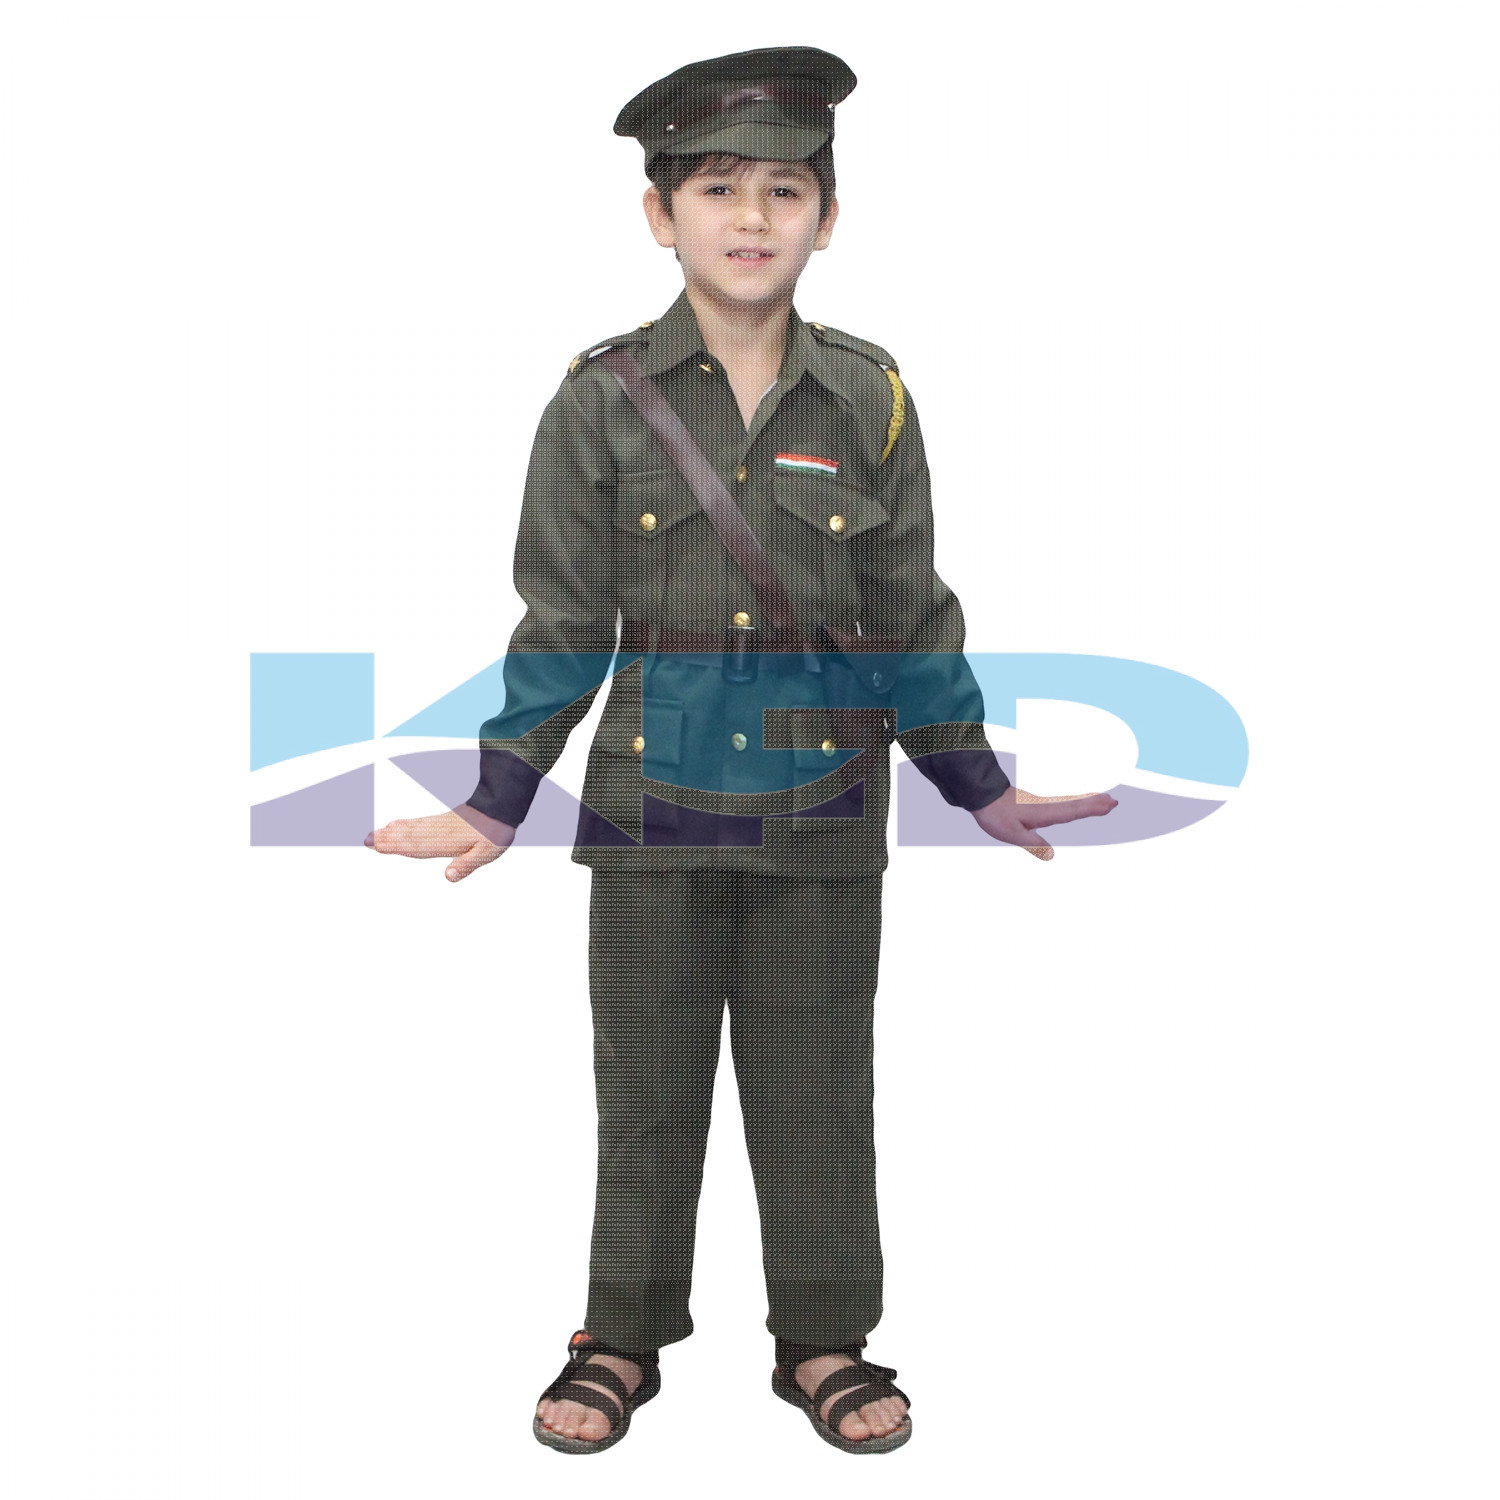  Indian Army Our Helper/National Hero Costume For Kids School Annual Function/Theme Party/Competition/Stage Shows Dress